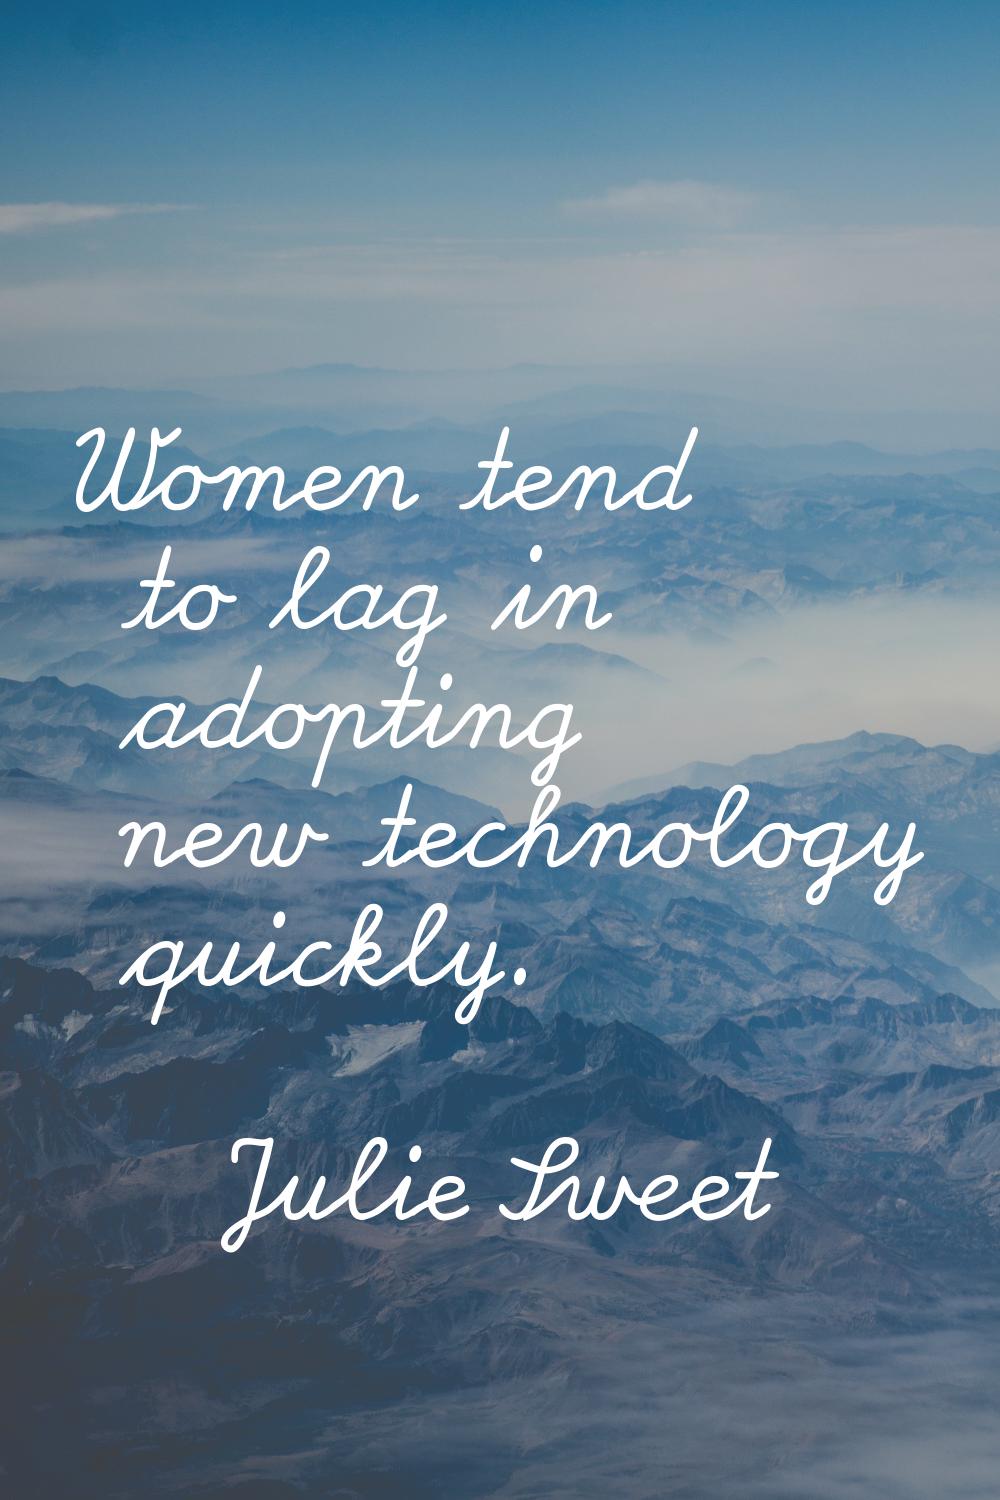 Women tend to lag in adopting new technology quickly.